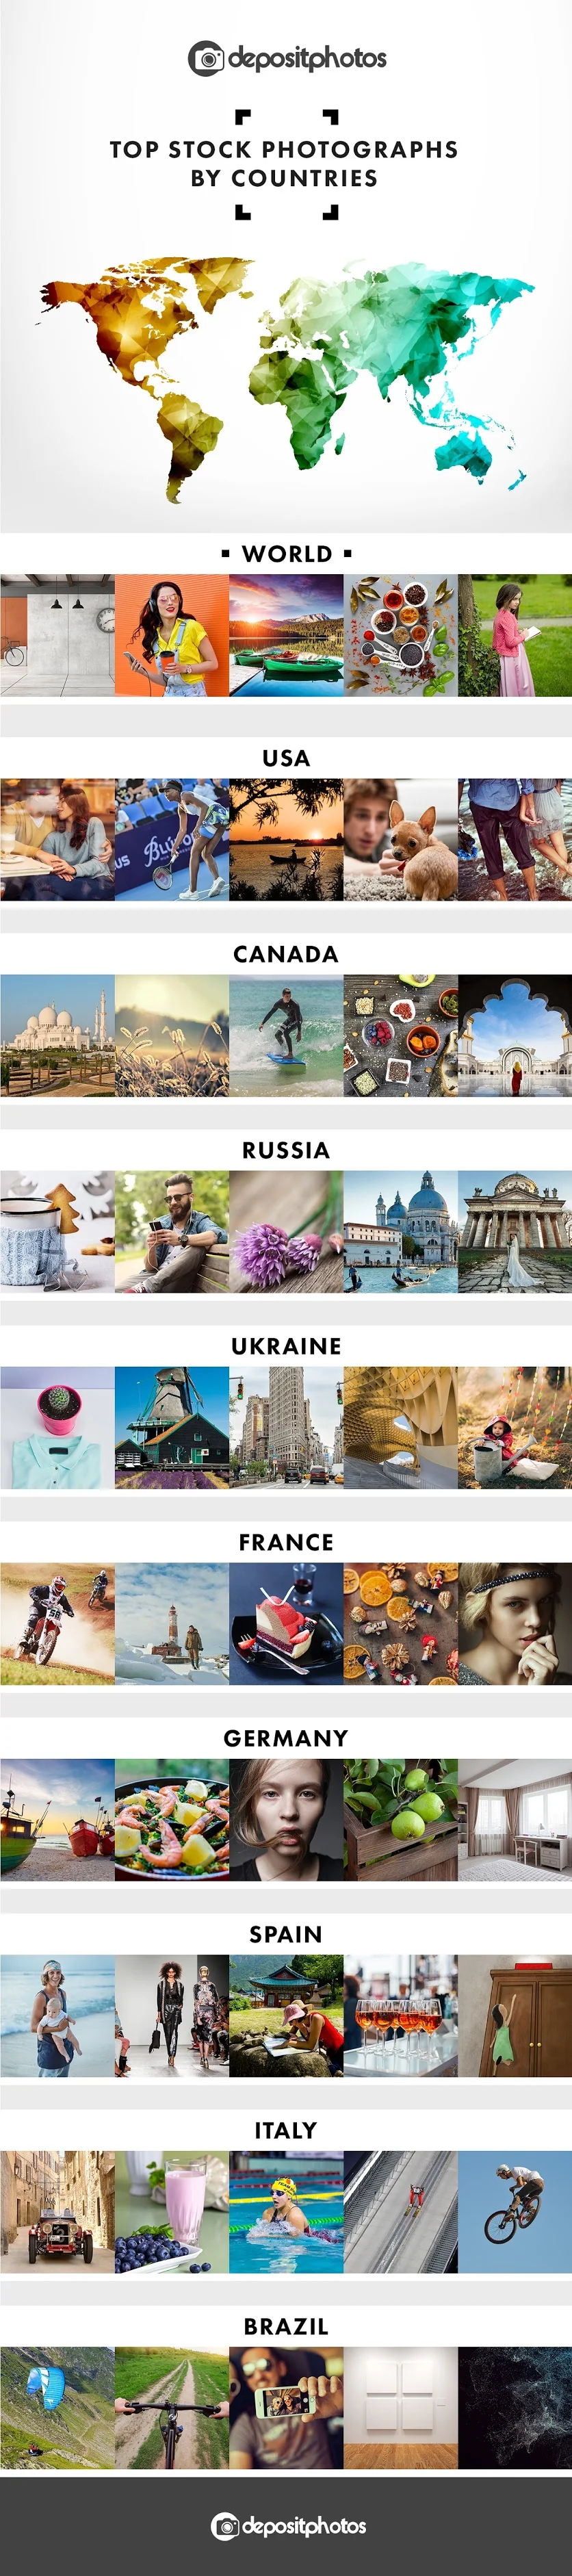 Top Stock Photographs By Countries - infographic